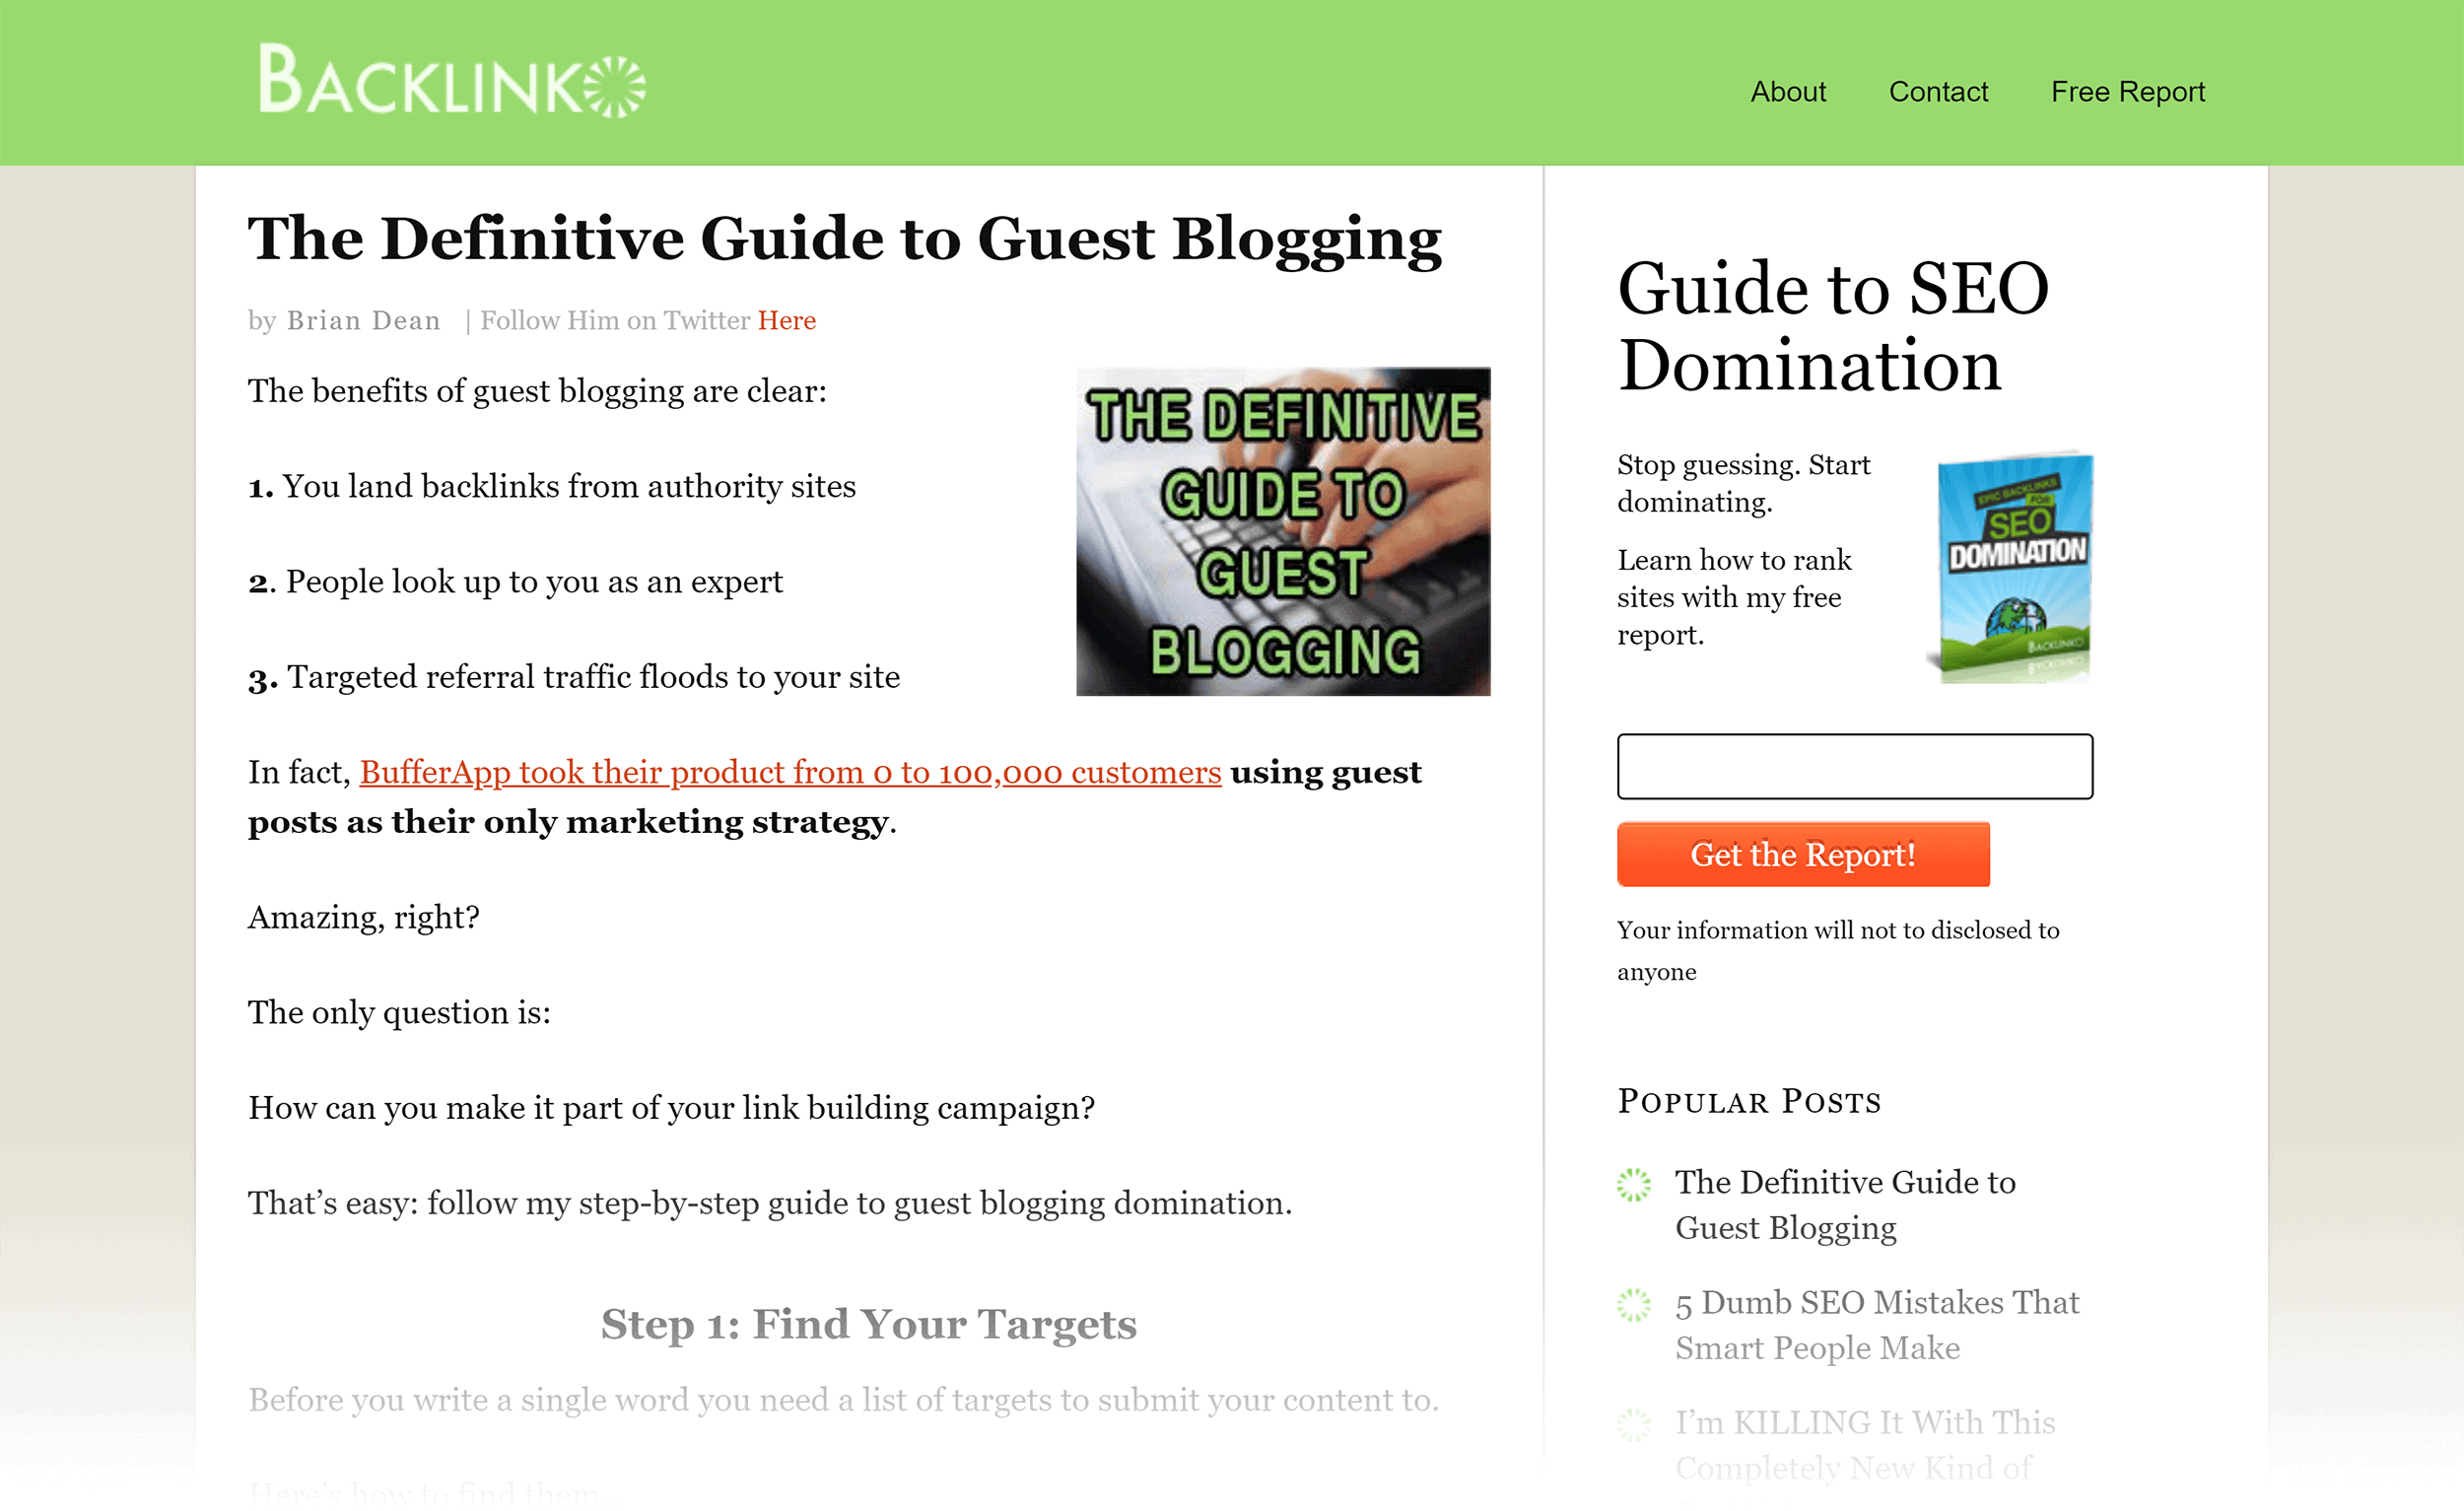 The Definitive Guide to Guest Blogging post – Old